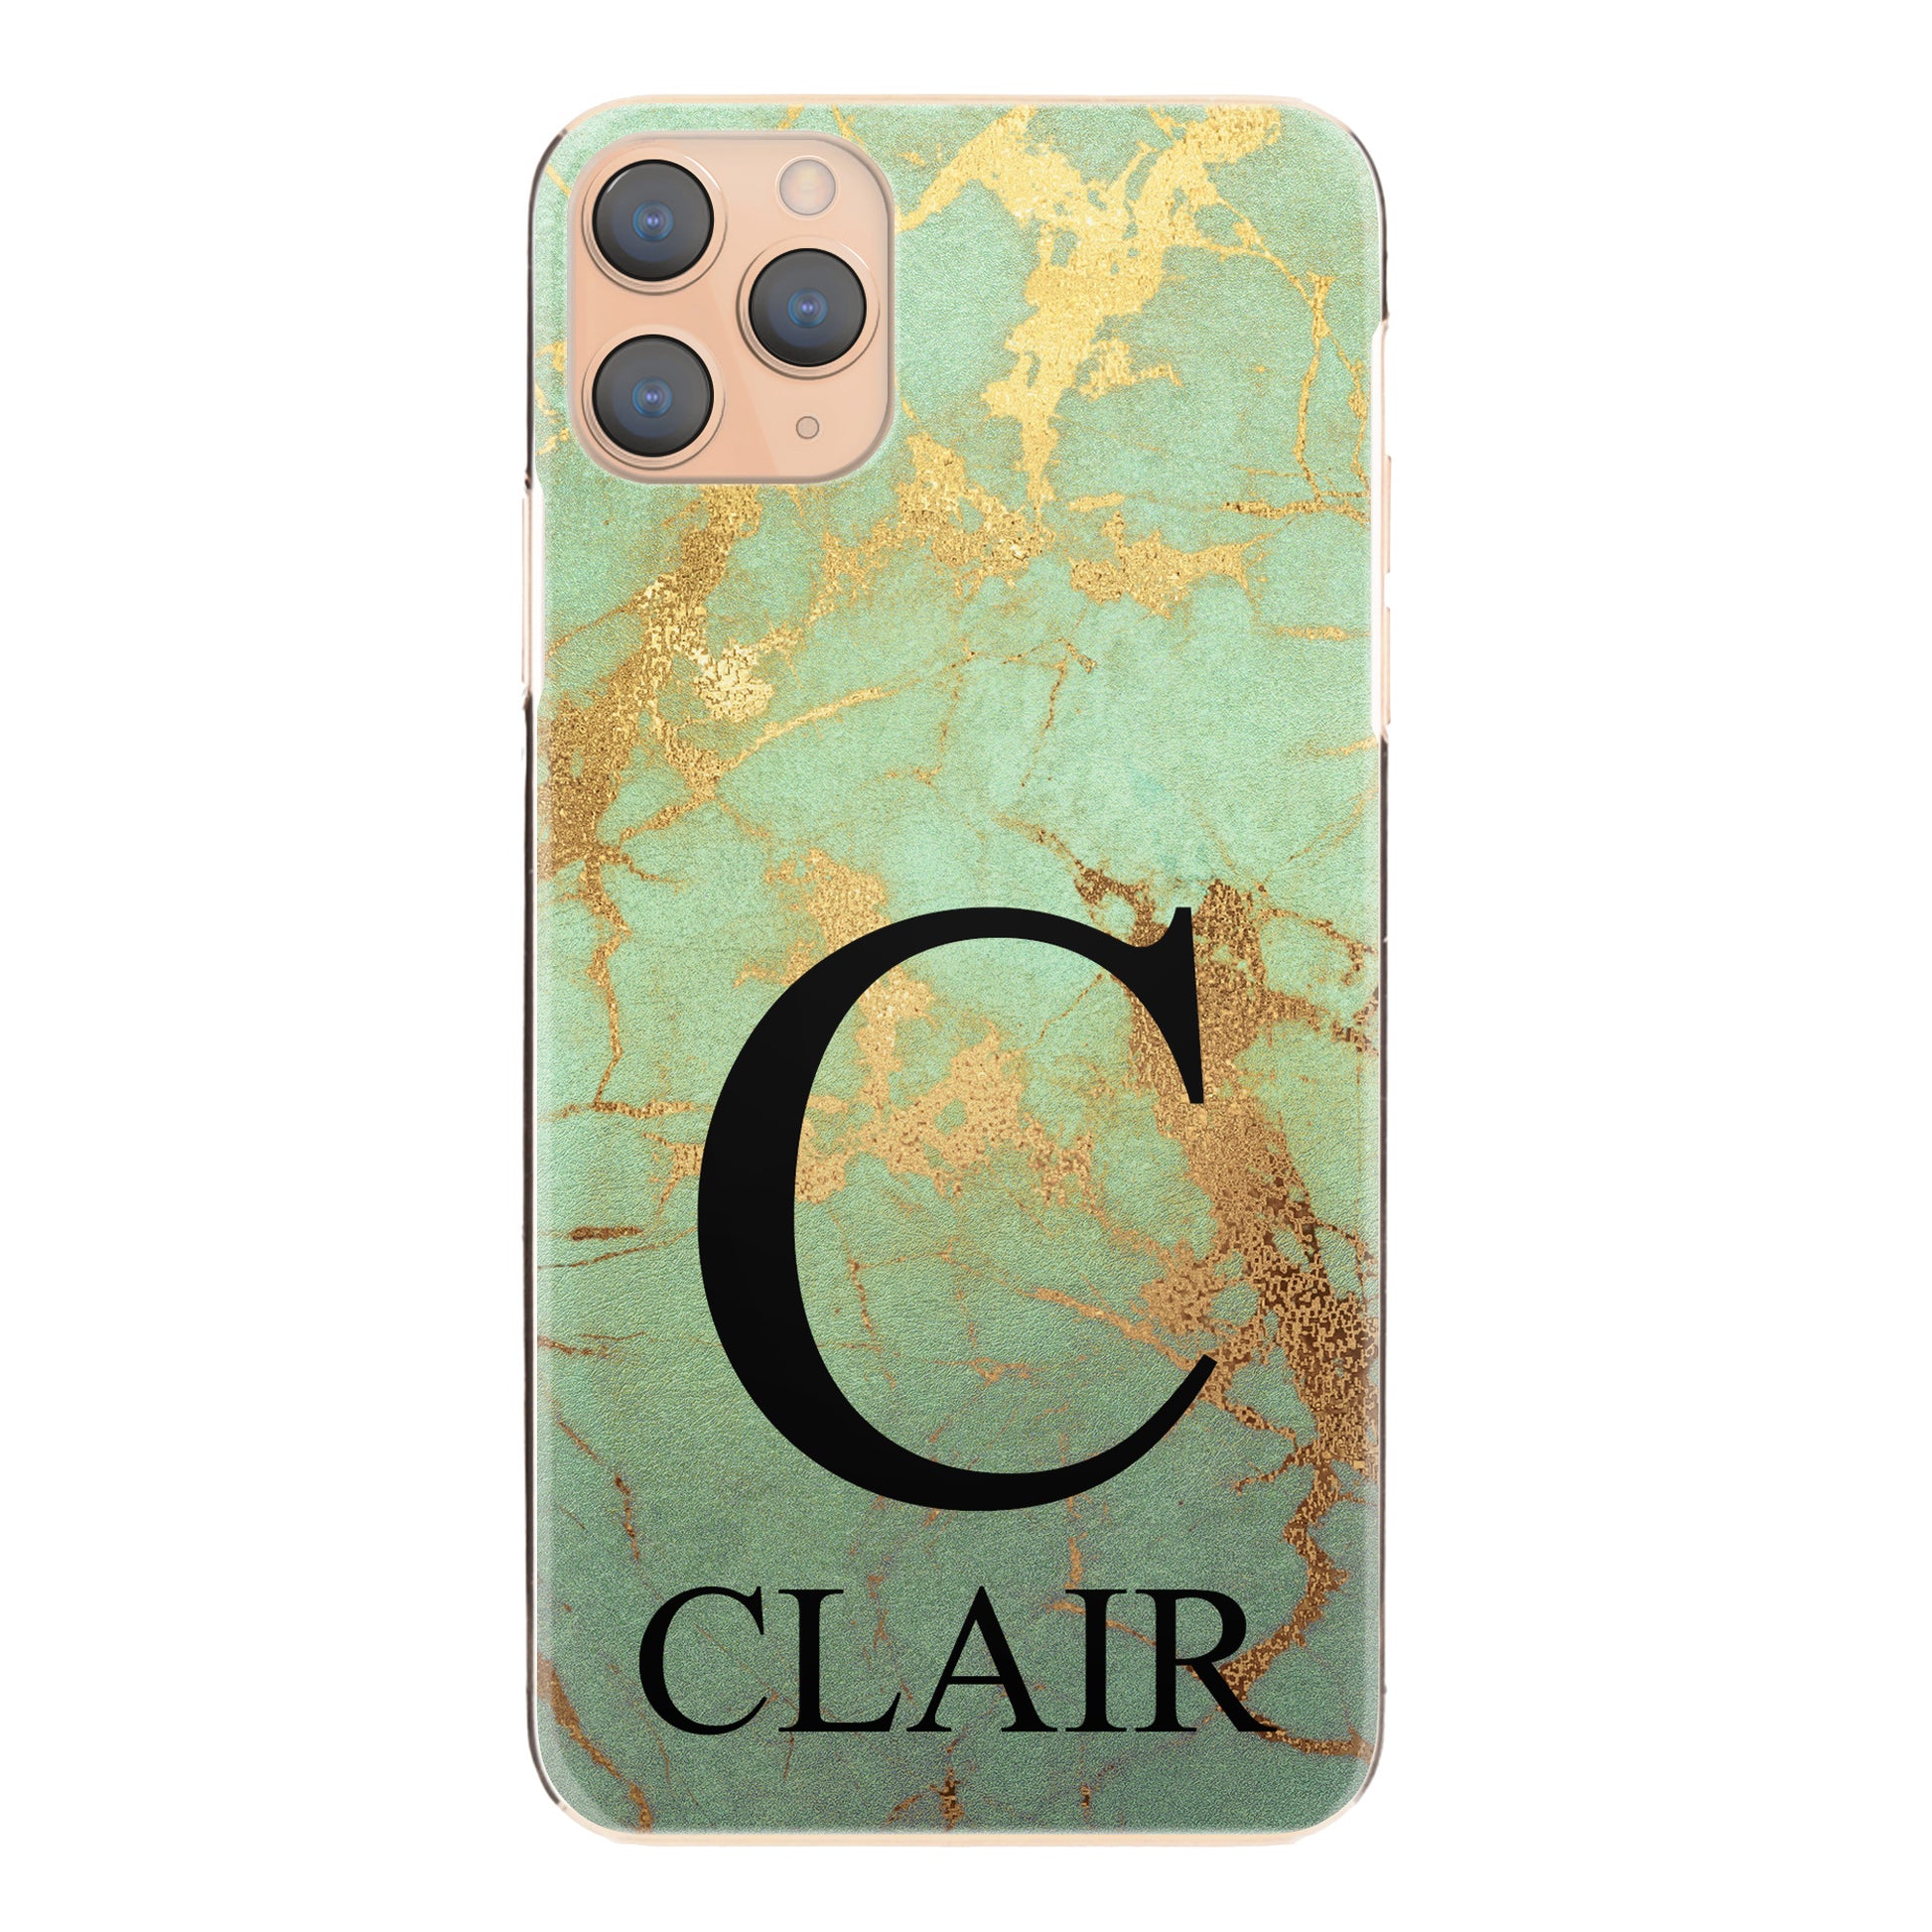 Personalised Apple iPhone Hard Case with Monogram and Text on Gold Infused Green Marble